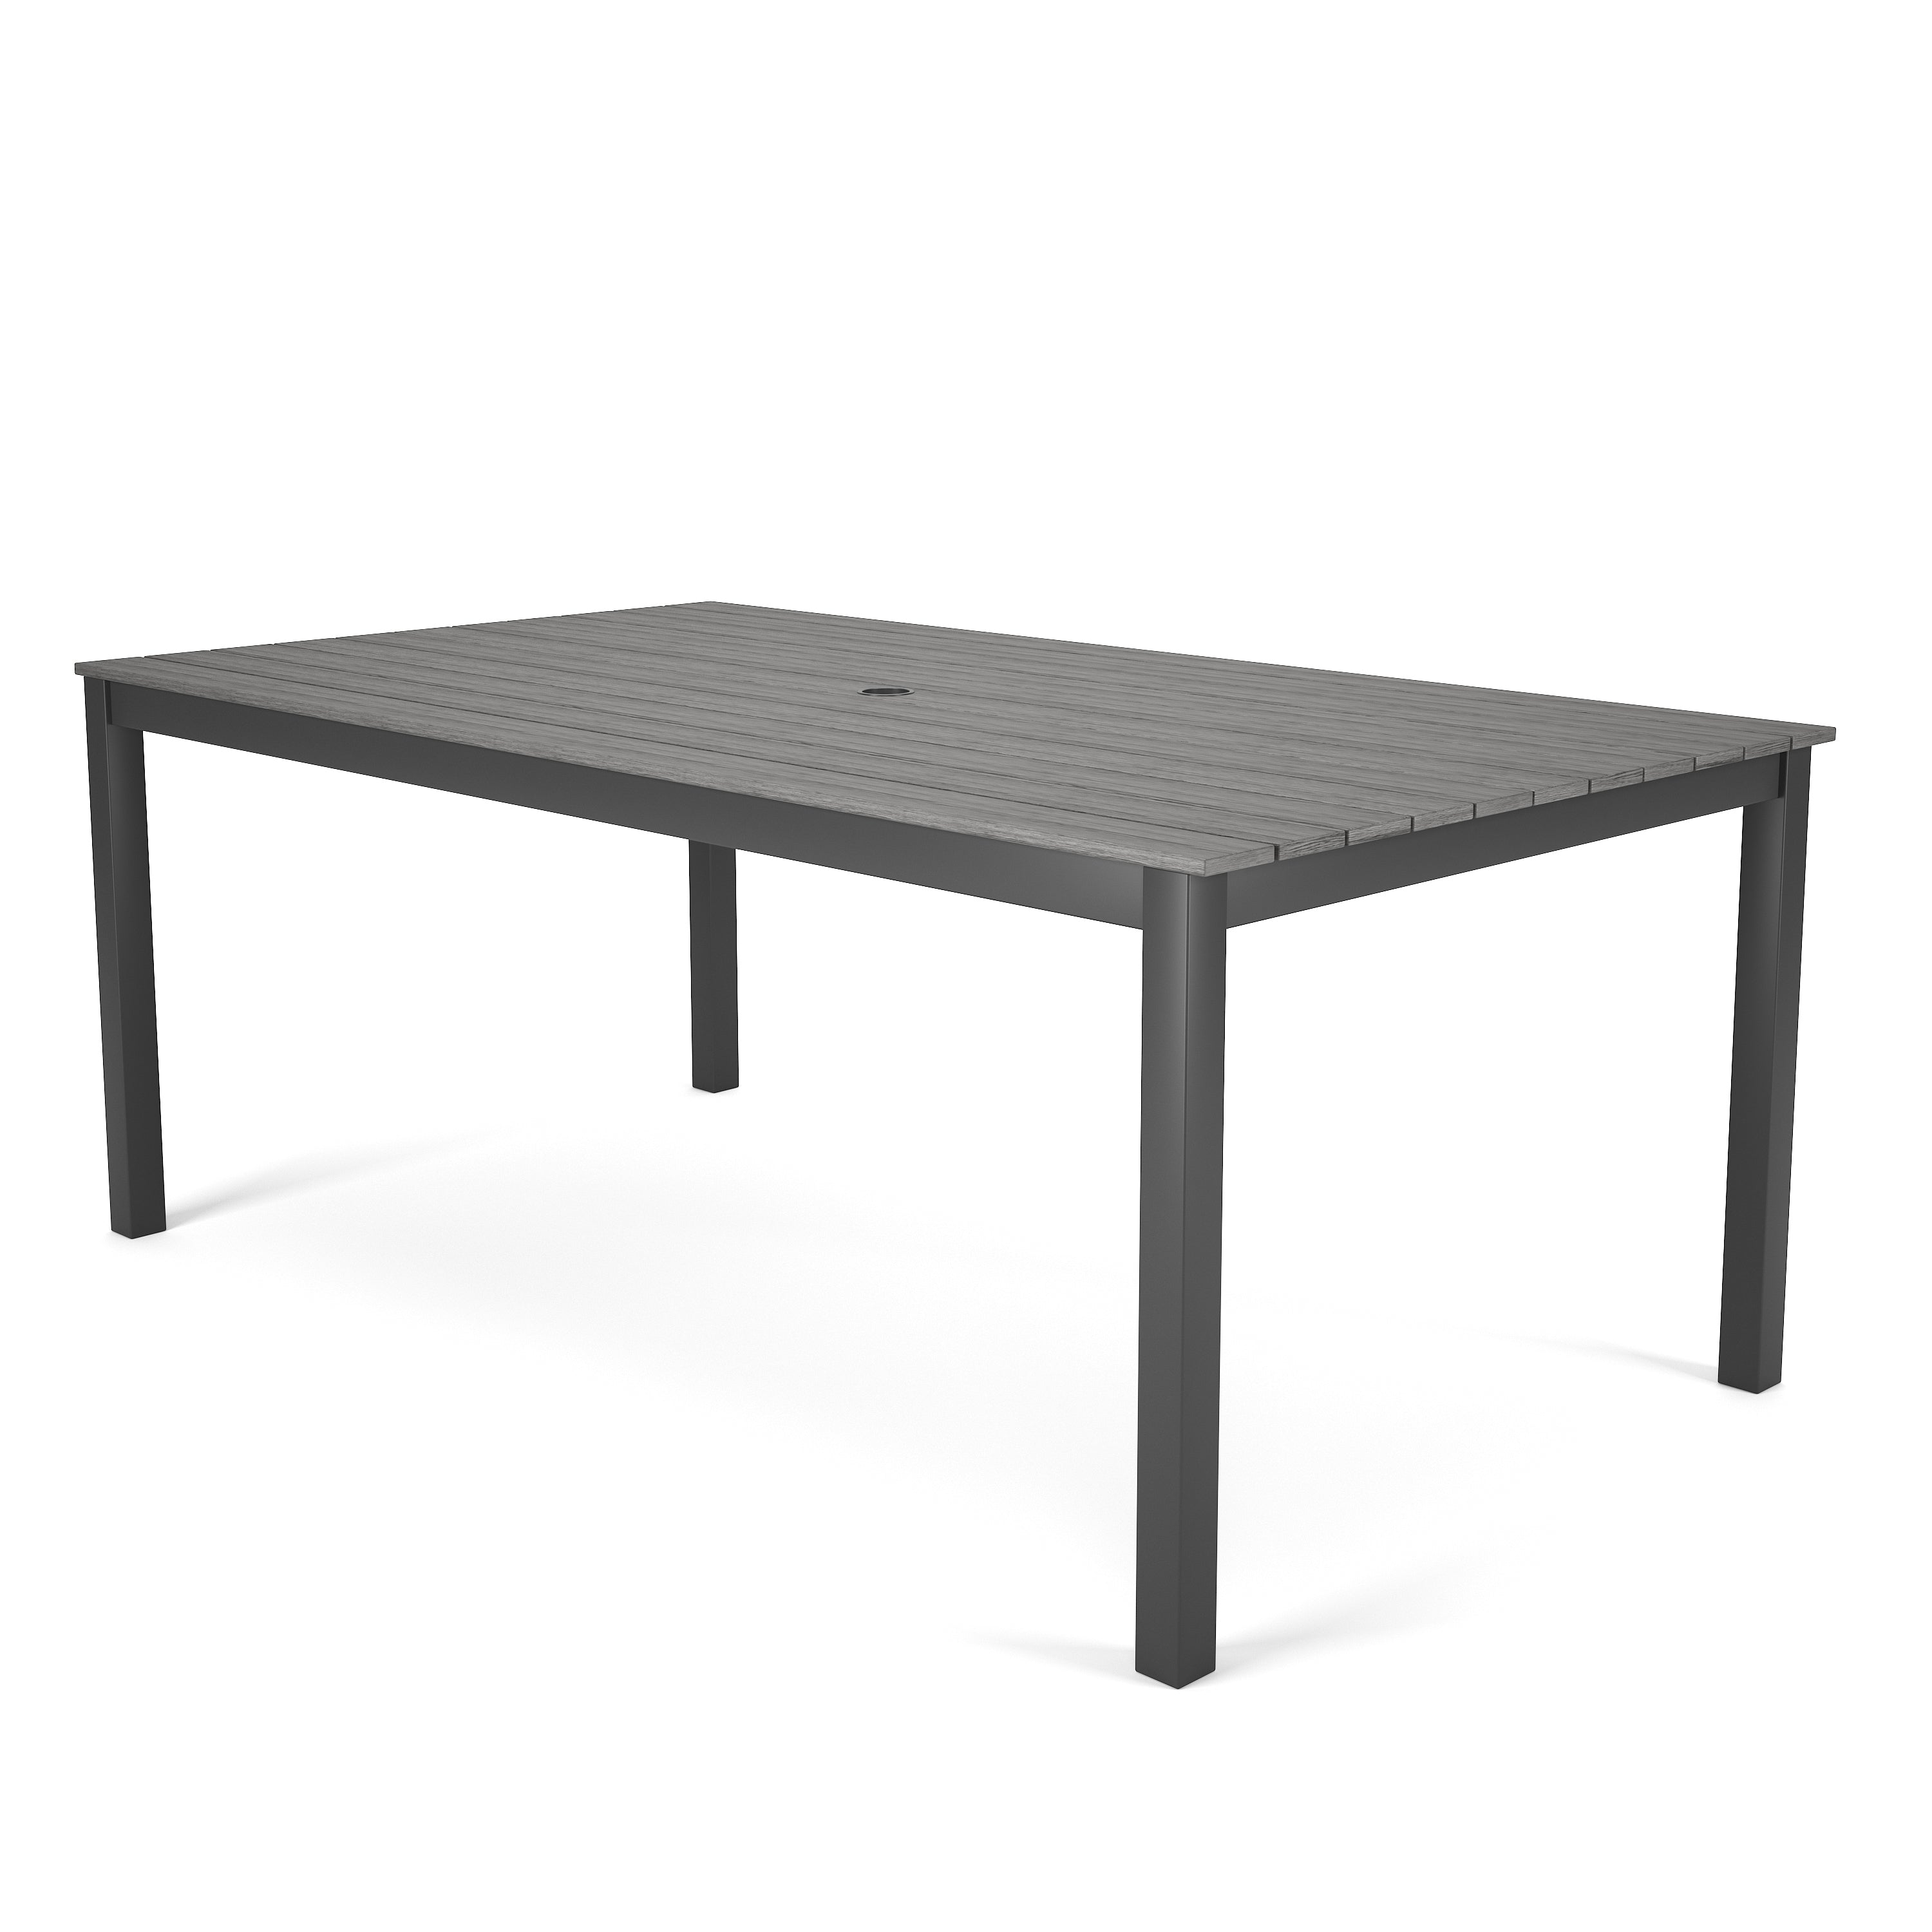 Forever Patio Chalfonte 72″ Rectangle Dining Table with Umbrella Hole by NorthCape International